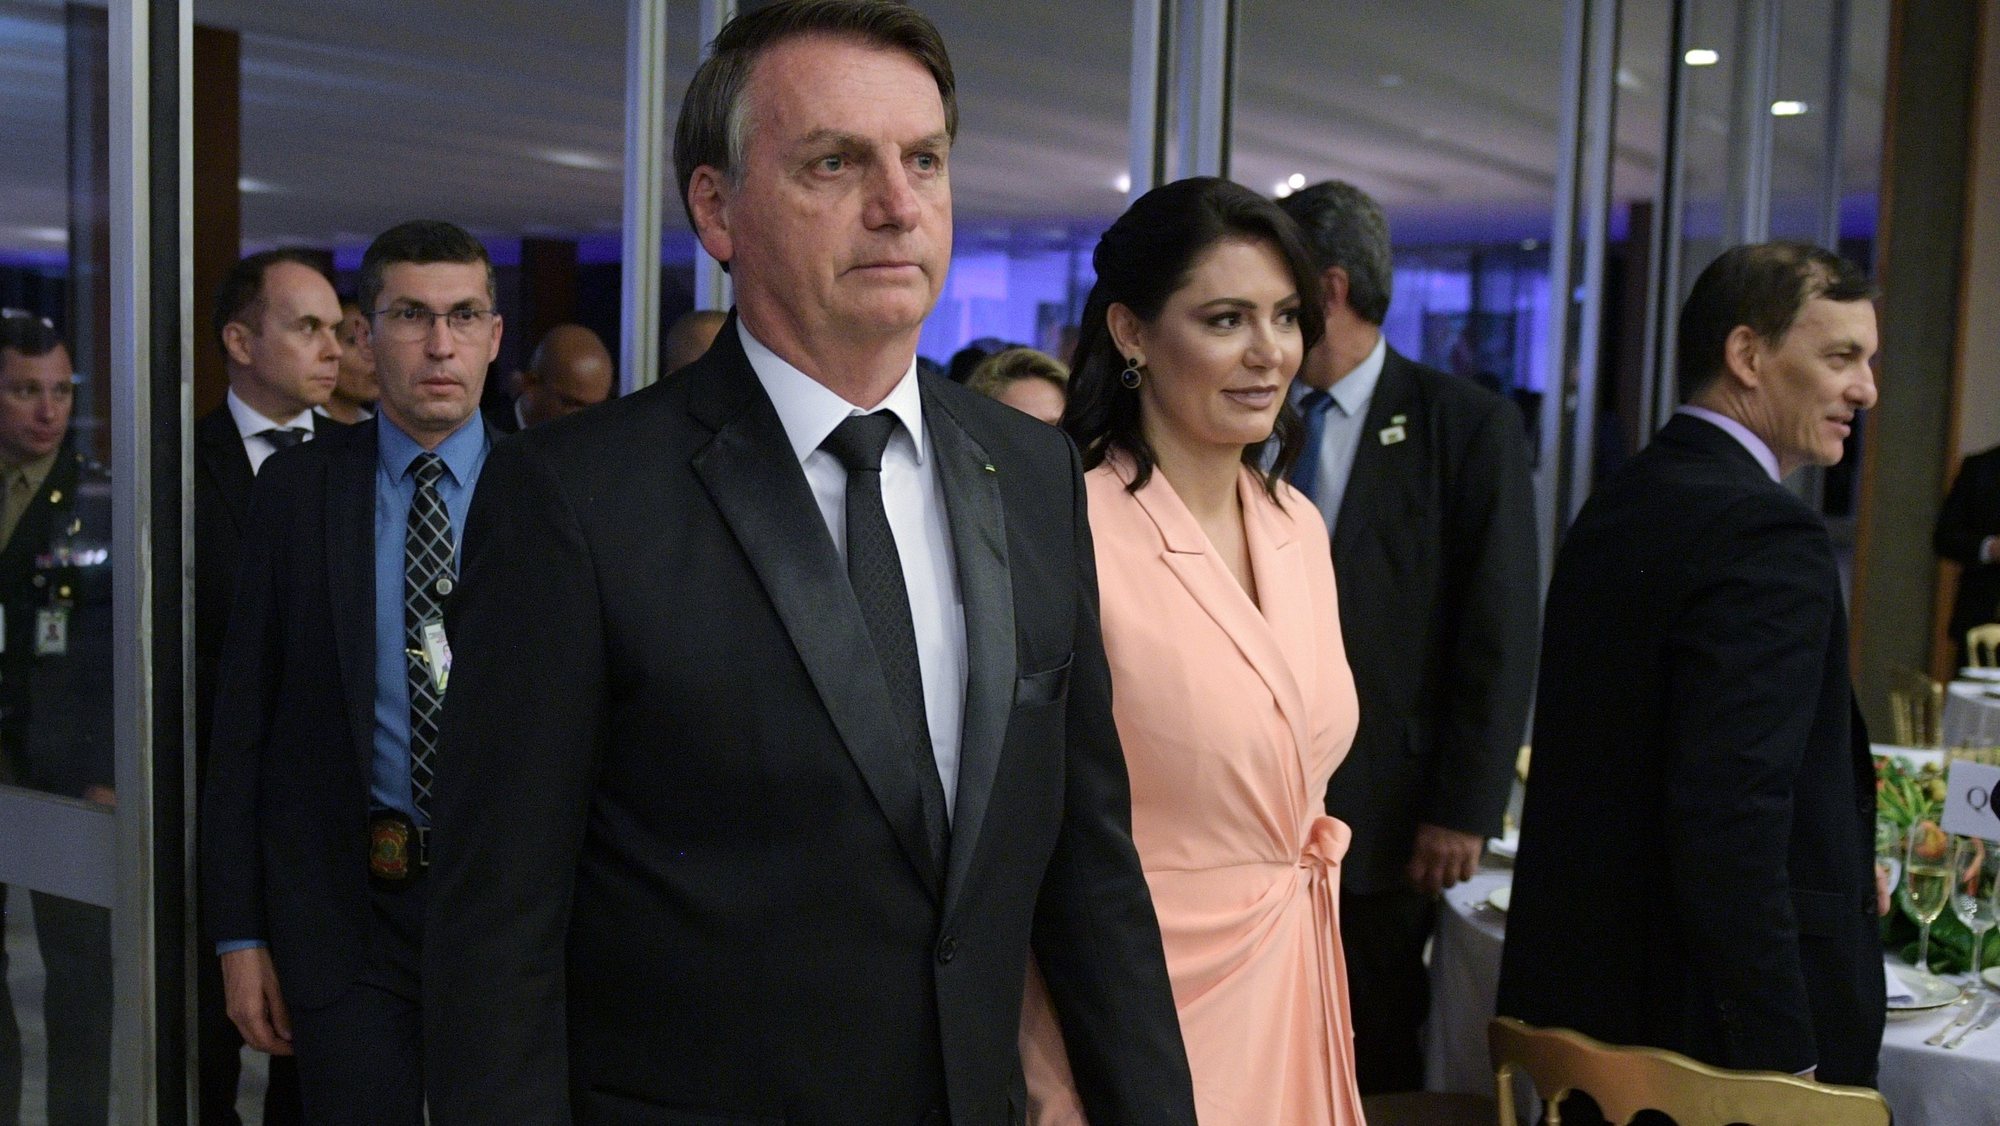 epa07994447 Brazilian President Jair Bolsonaro (C-L) and his wife Michelle Bolsonaro (C-R) arrive at a reception for Brazil, Russia, India, China and South Africa (BRICS) leaders on the sidelines of the 11th BRICS Business Forum at the Ministry of Foreign Affairs in Brasilia, Brazil, 13 November 2019.  EPA/ALEXEI DRUZHININ / KREMLIN POOL/SPUTNIK / POOL MANDATORY CREDIT